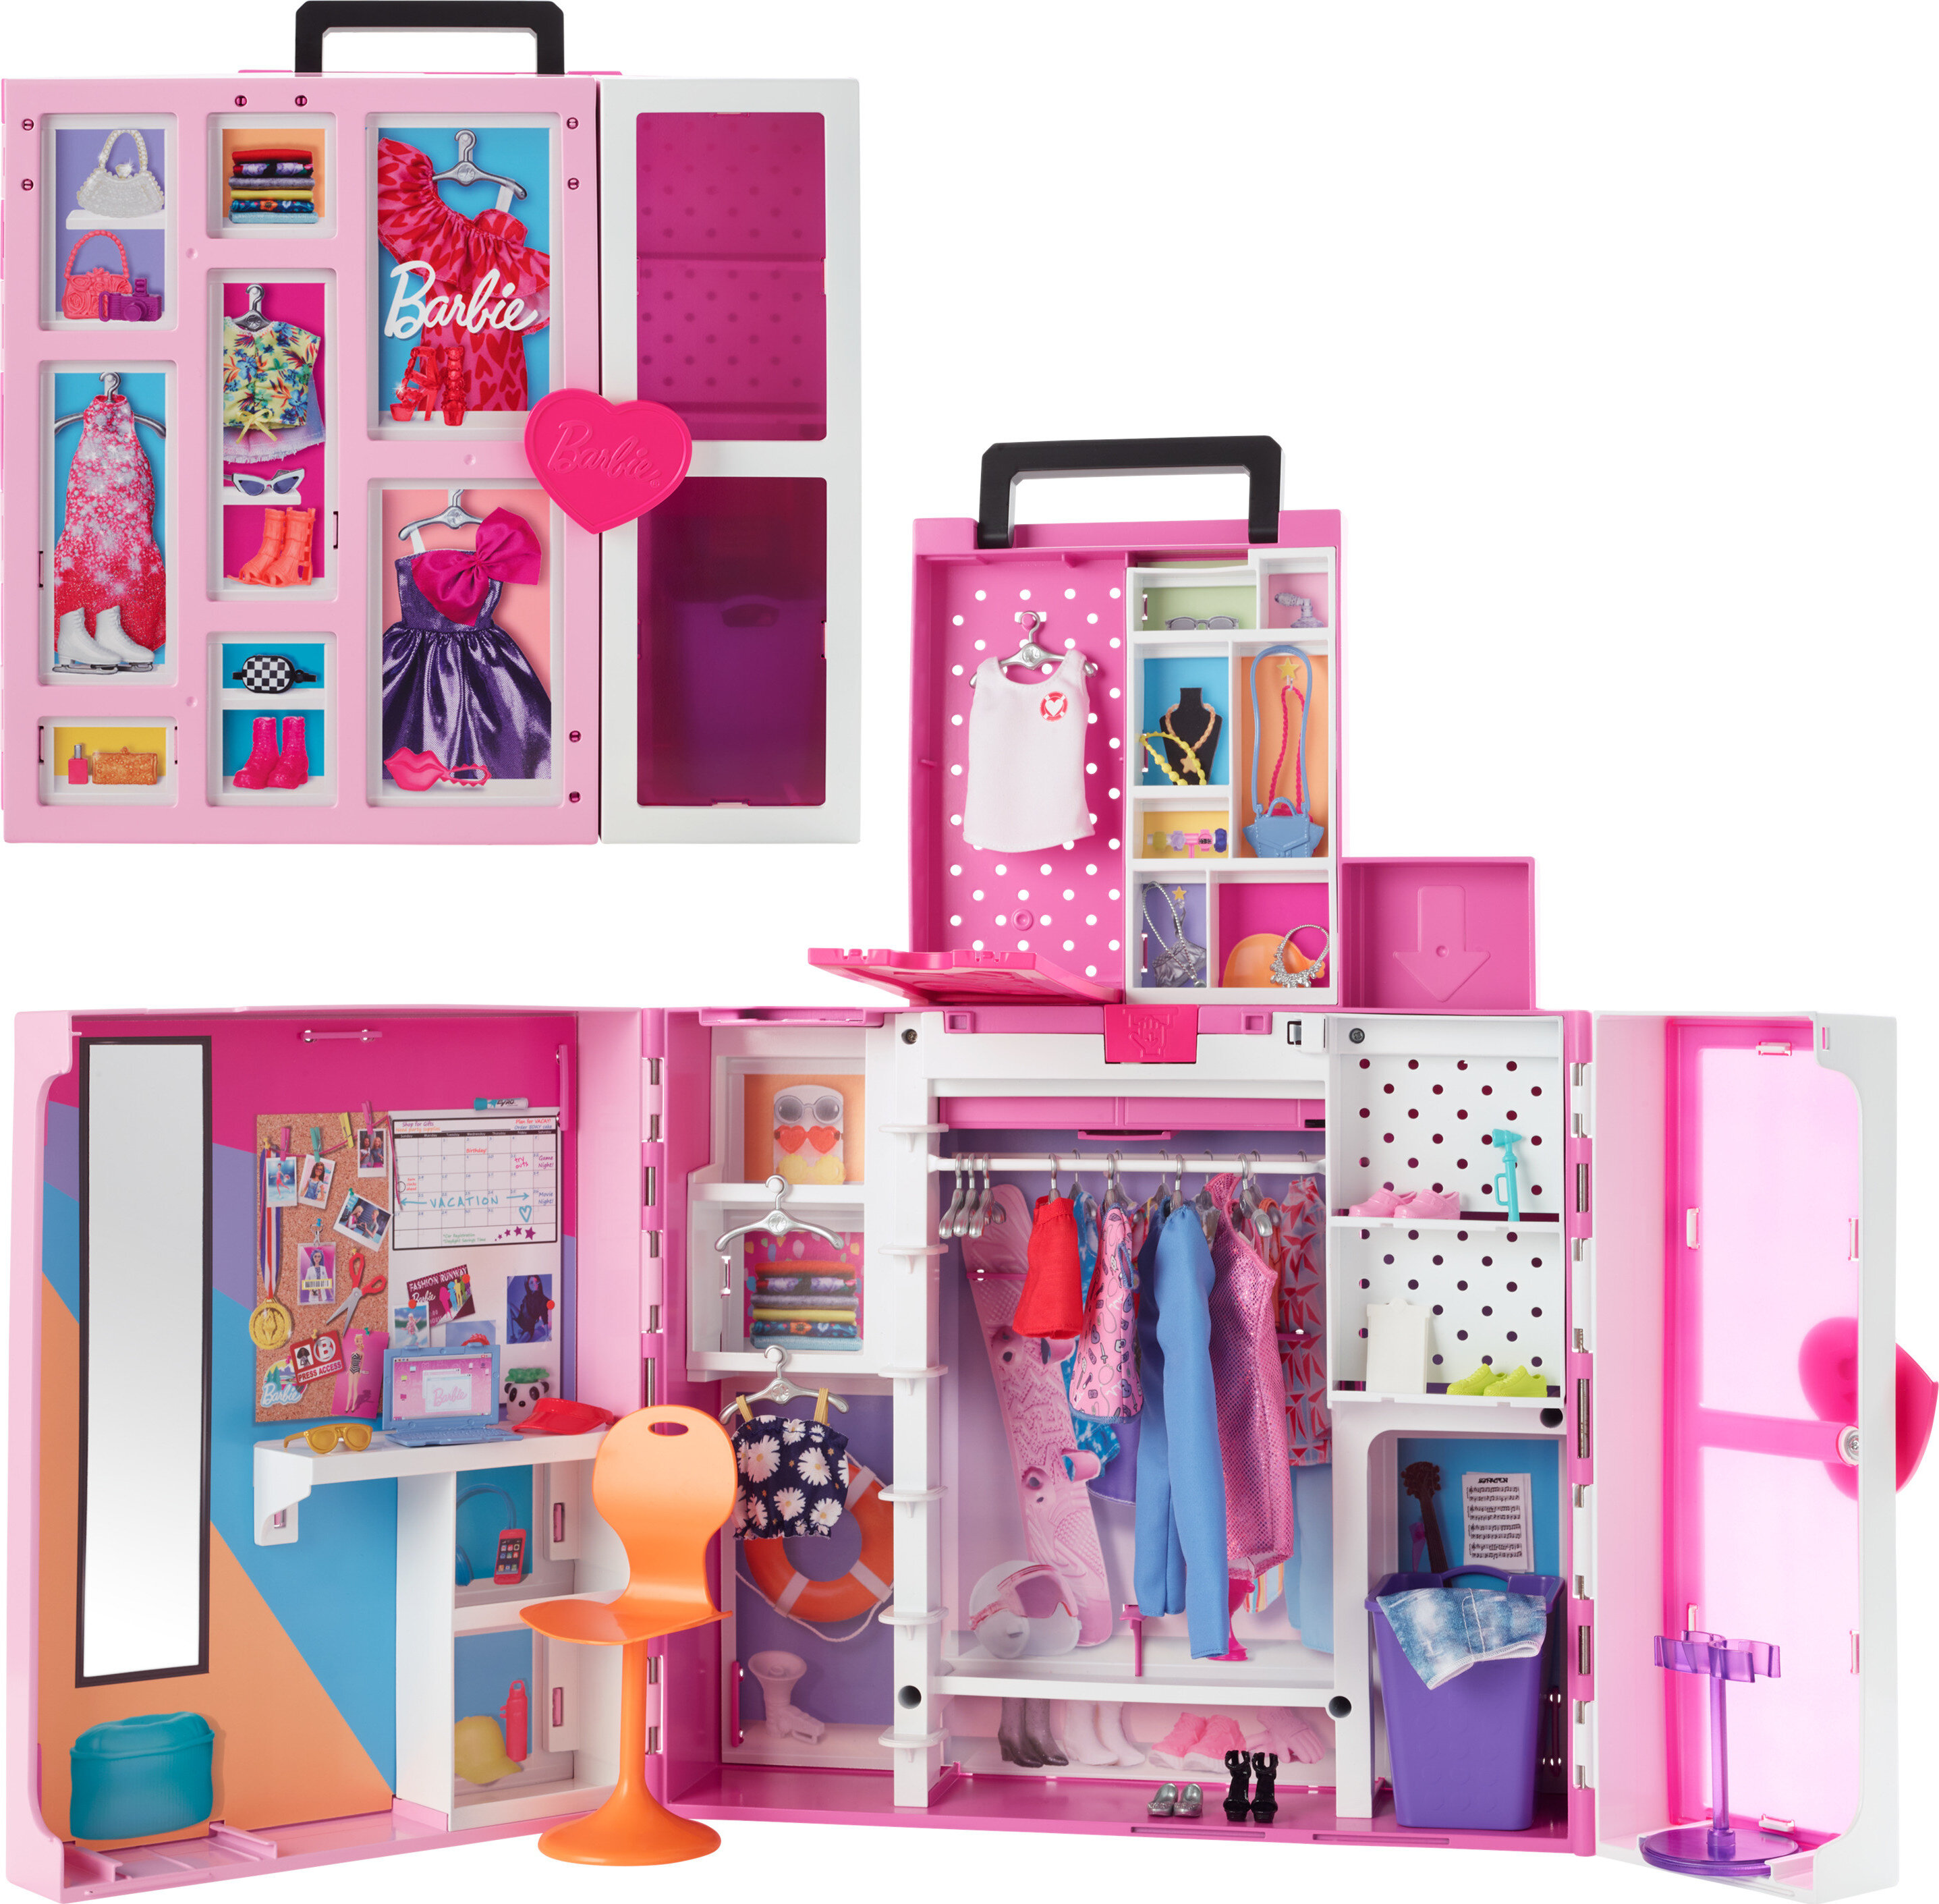 Barbie Dream Closet Playset with 35+ Clothes and Accessories, Mirror and Laundry Chute - image 1 of 7